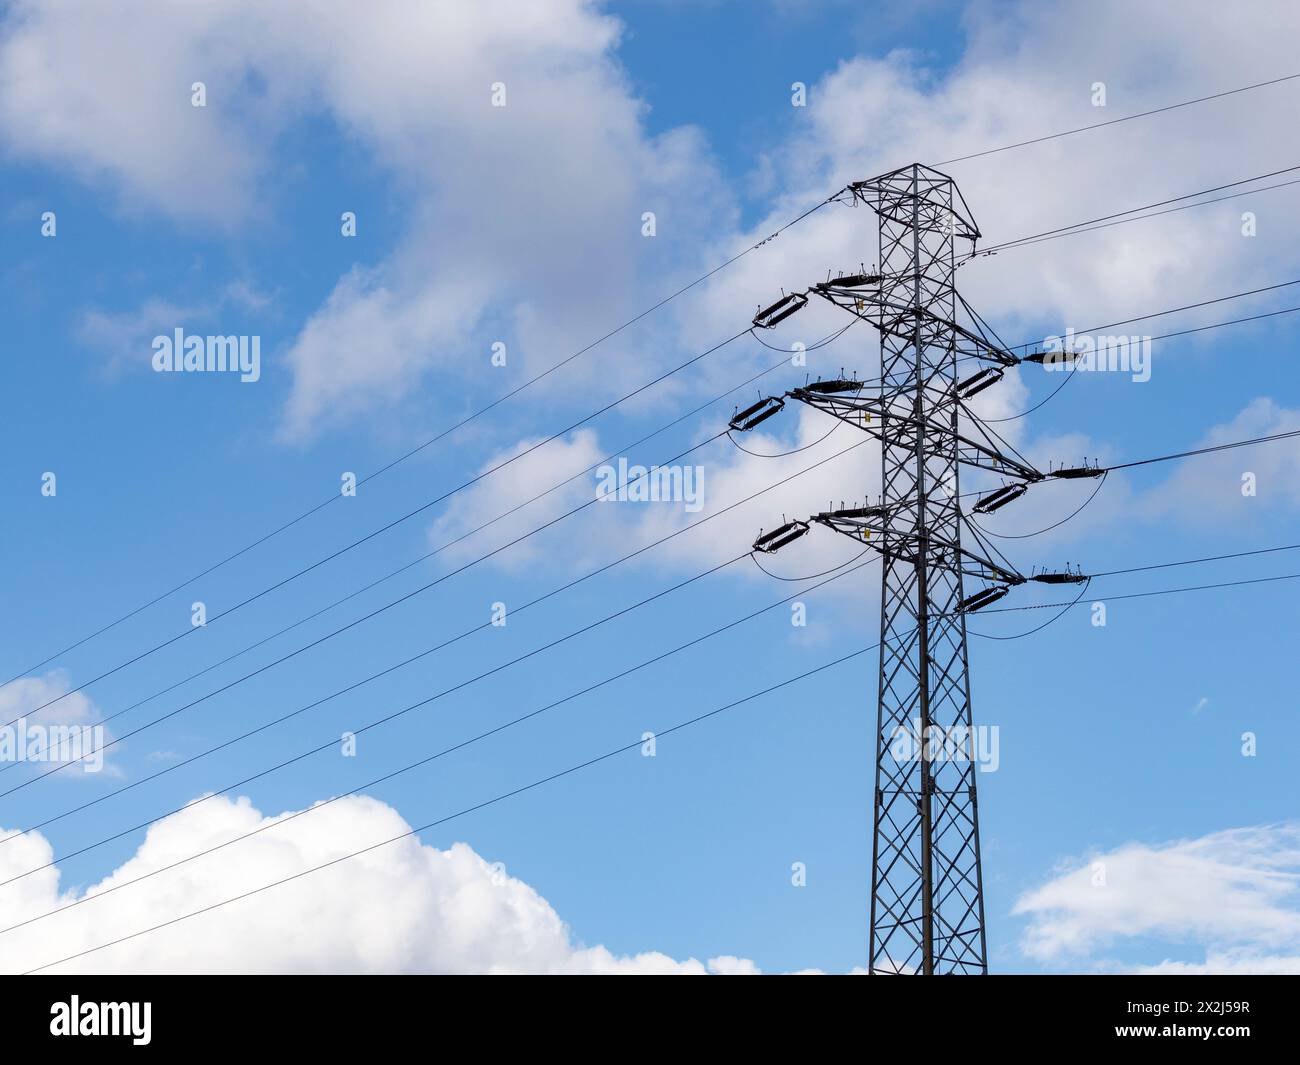 A high-voltage transmission pole with visible wires and insulators against a blue, slightly cloudy sky. Power lines, strategic infrastructure. Stock Photo